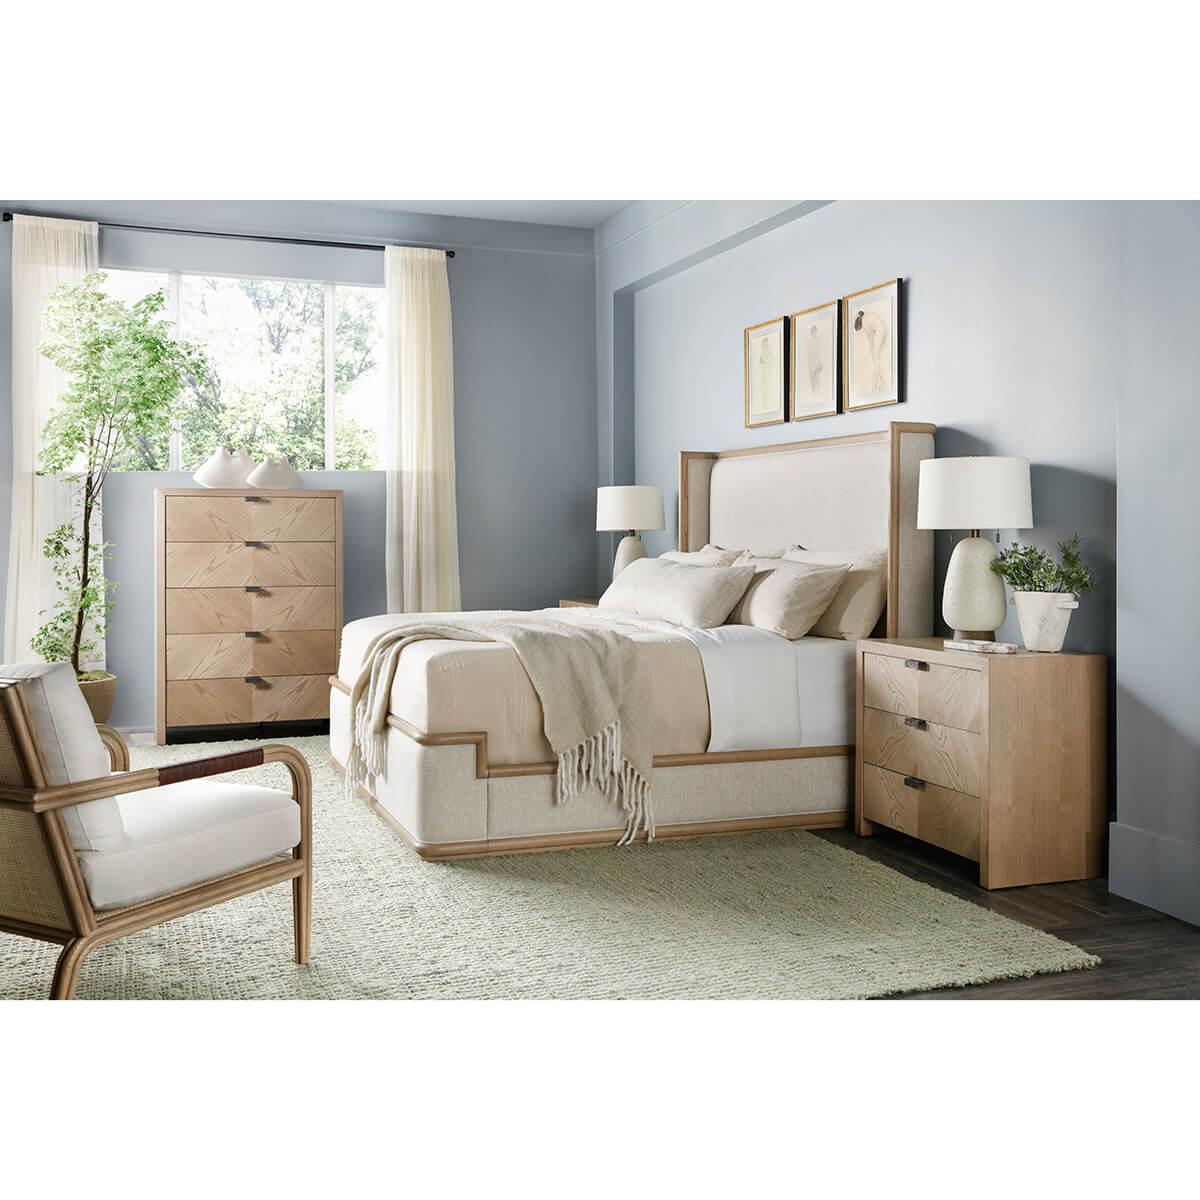 Modern Framed and Upholstered Bed, with a smooth straight grain exposed oak frame trim in our light dune finish. With a high back padded upholstered headboard, upholstered rails and foot board.
California King dimensions: 77.75